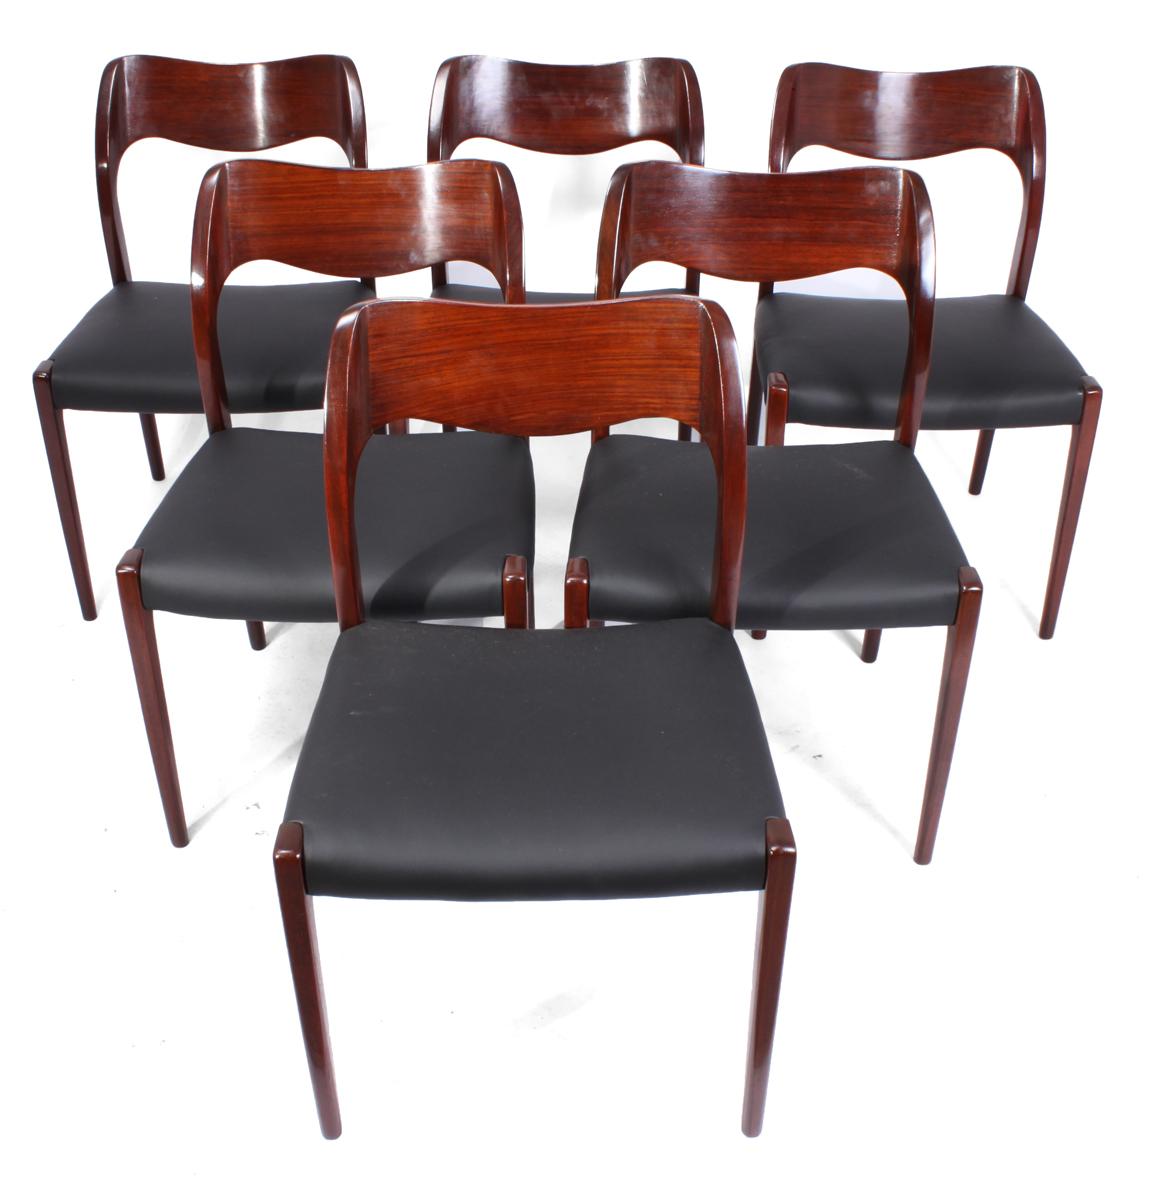 Model 71 dining chairs by Moller in Rosewood
A set of six model 71 dining chairs in rosewood with leather upholstery, originally produced in Denmark in the 1960s, the chairs are solid with no loose joints or old breaks, the frames have been fully